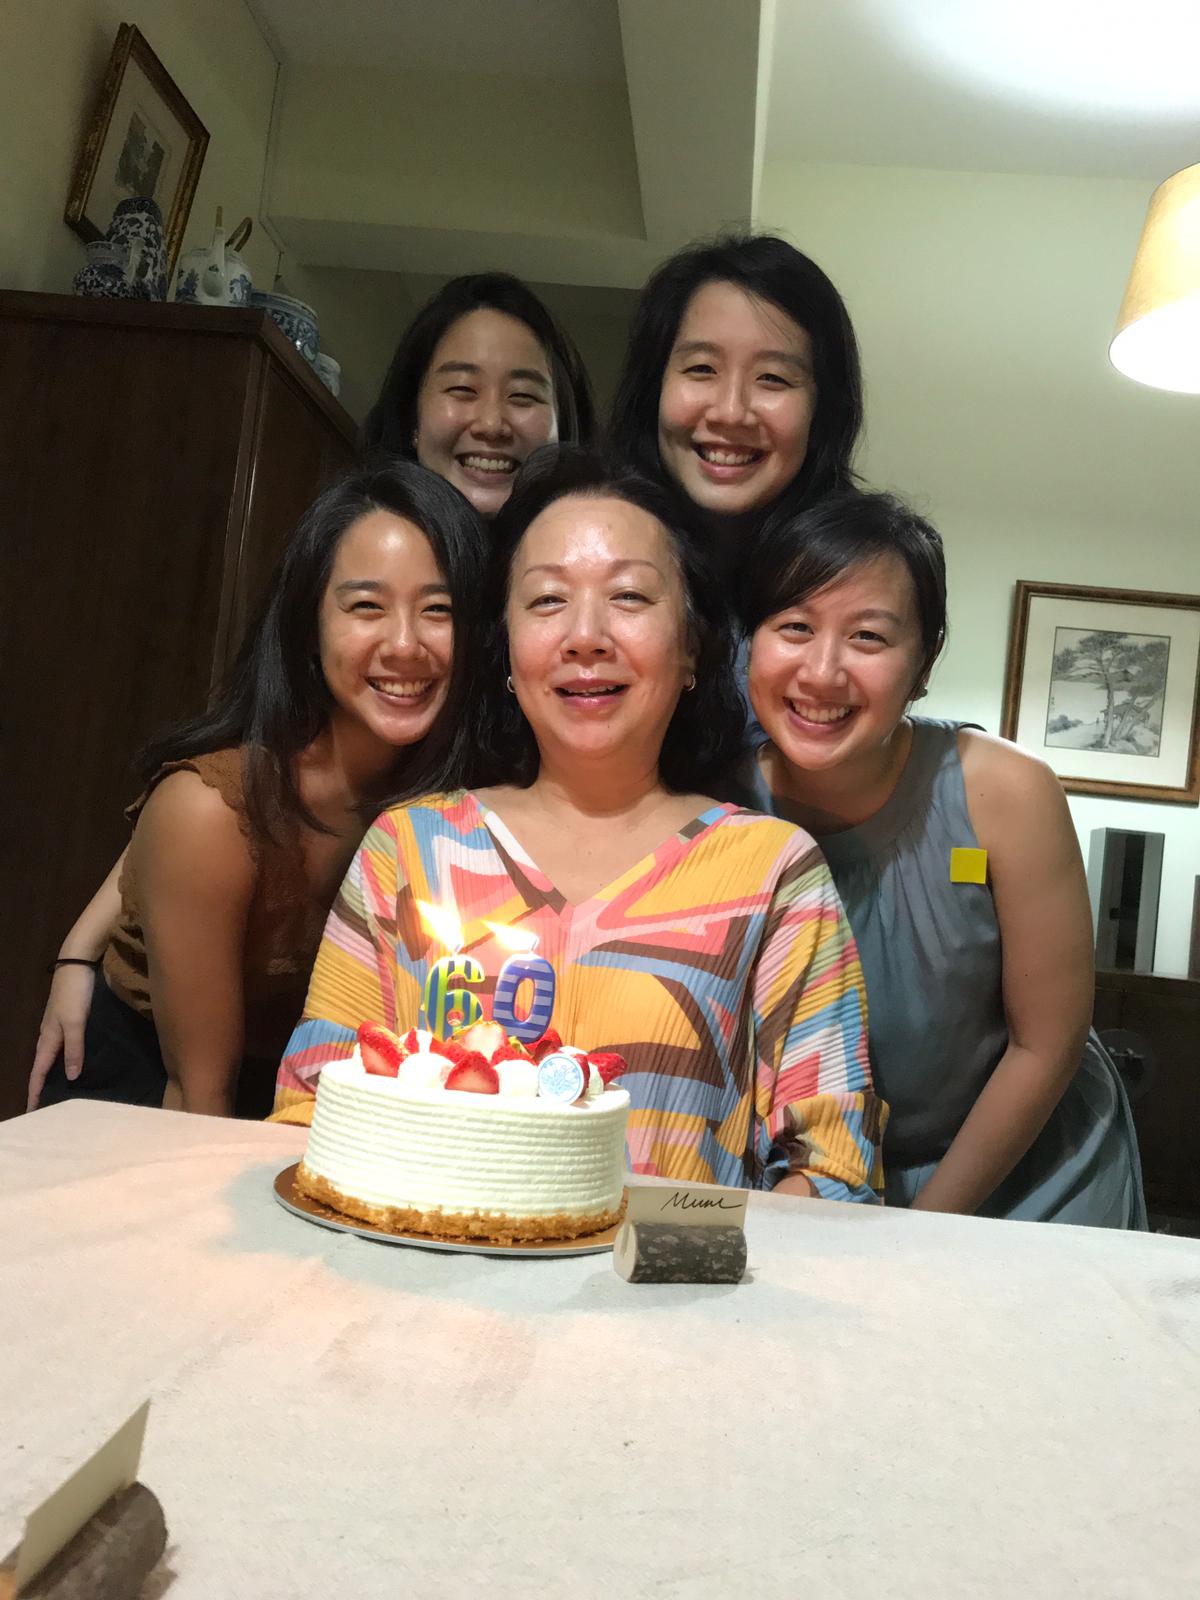 Hwee Ling is particularly thankful for her mother and three sisters, who have been her "pillar" through this difficult time.